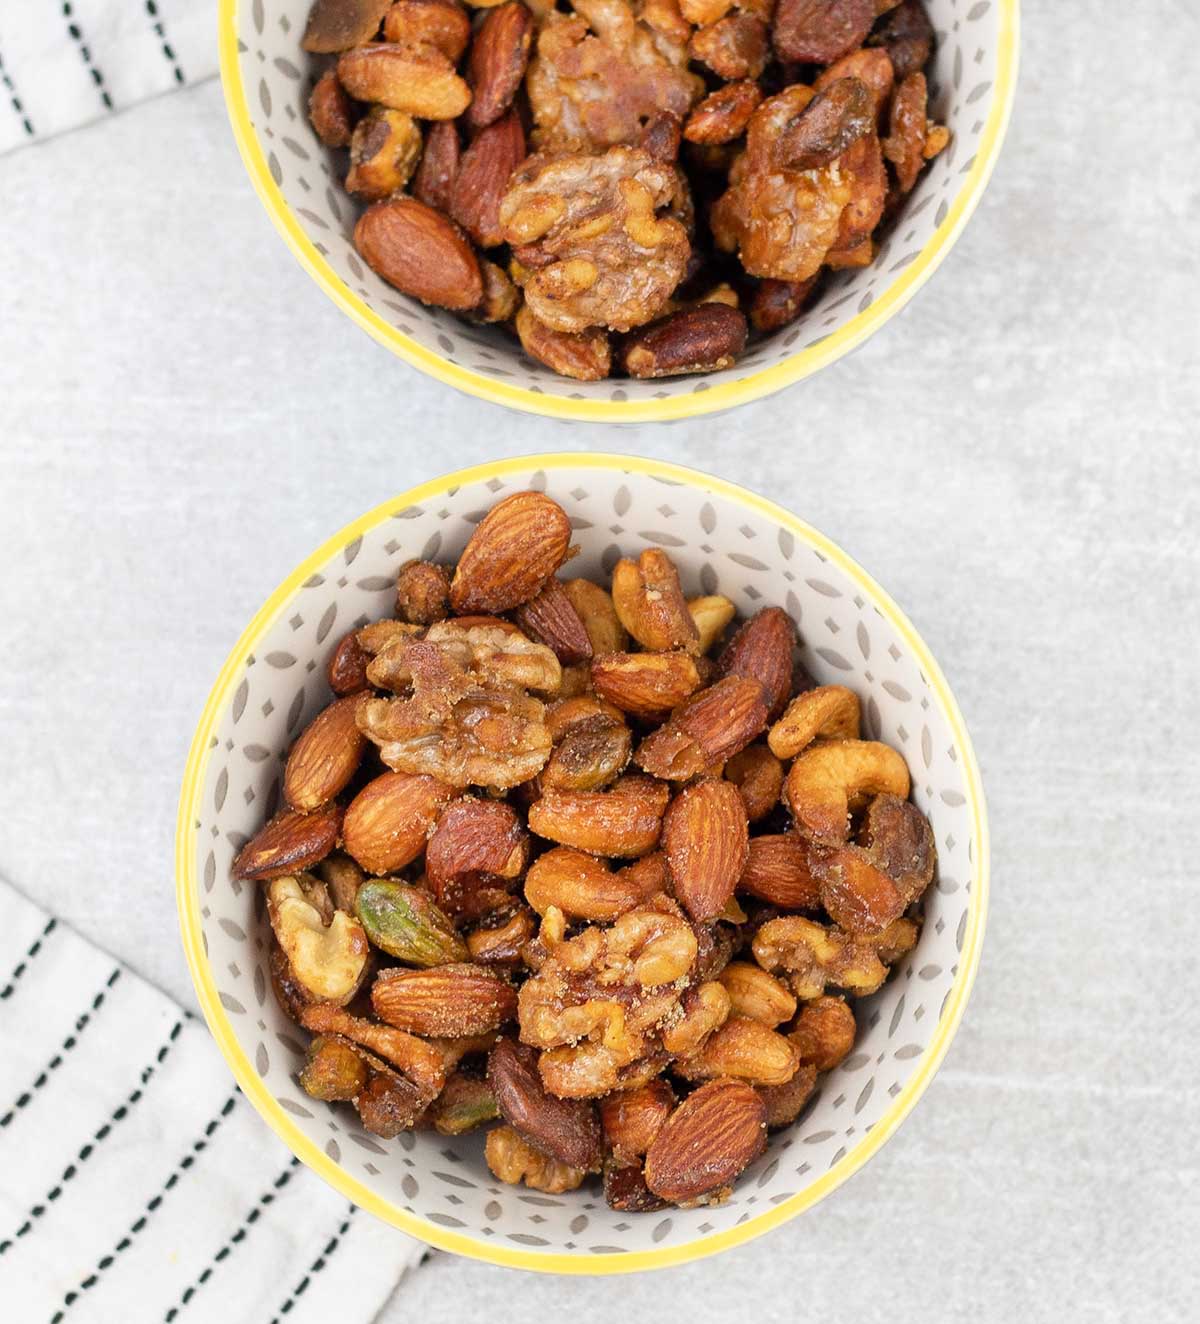 2 bowls filled with Honey Roasted Mixed Nuts.